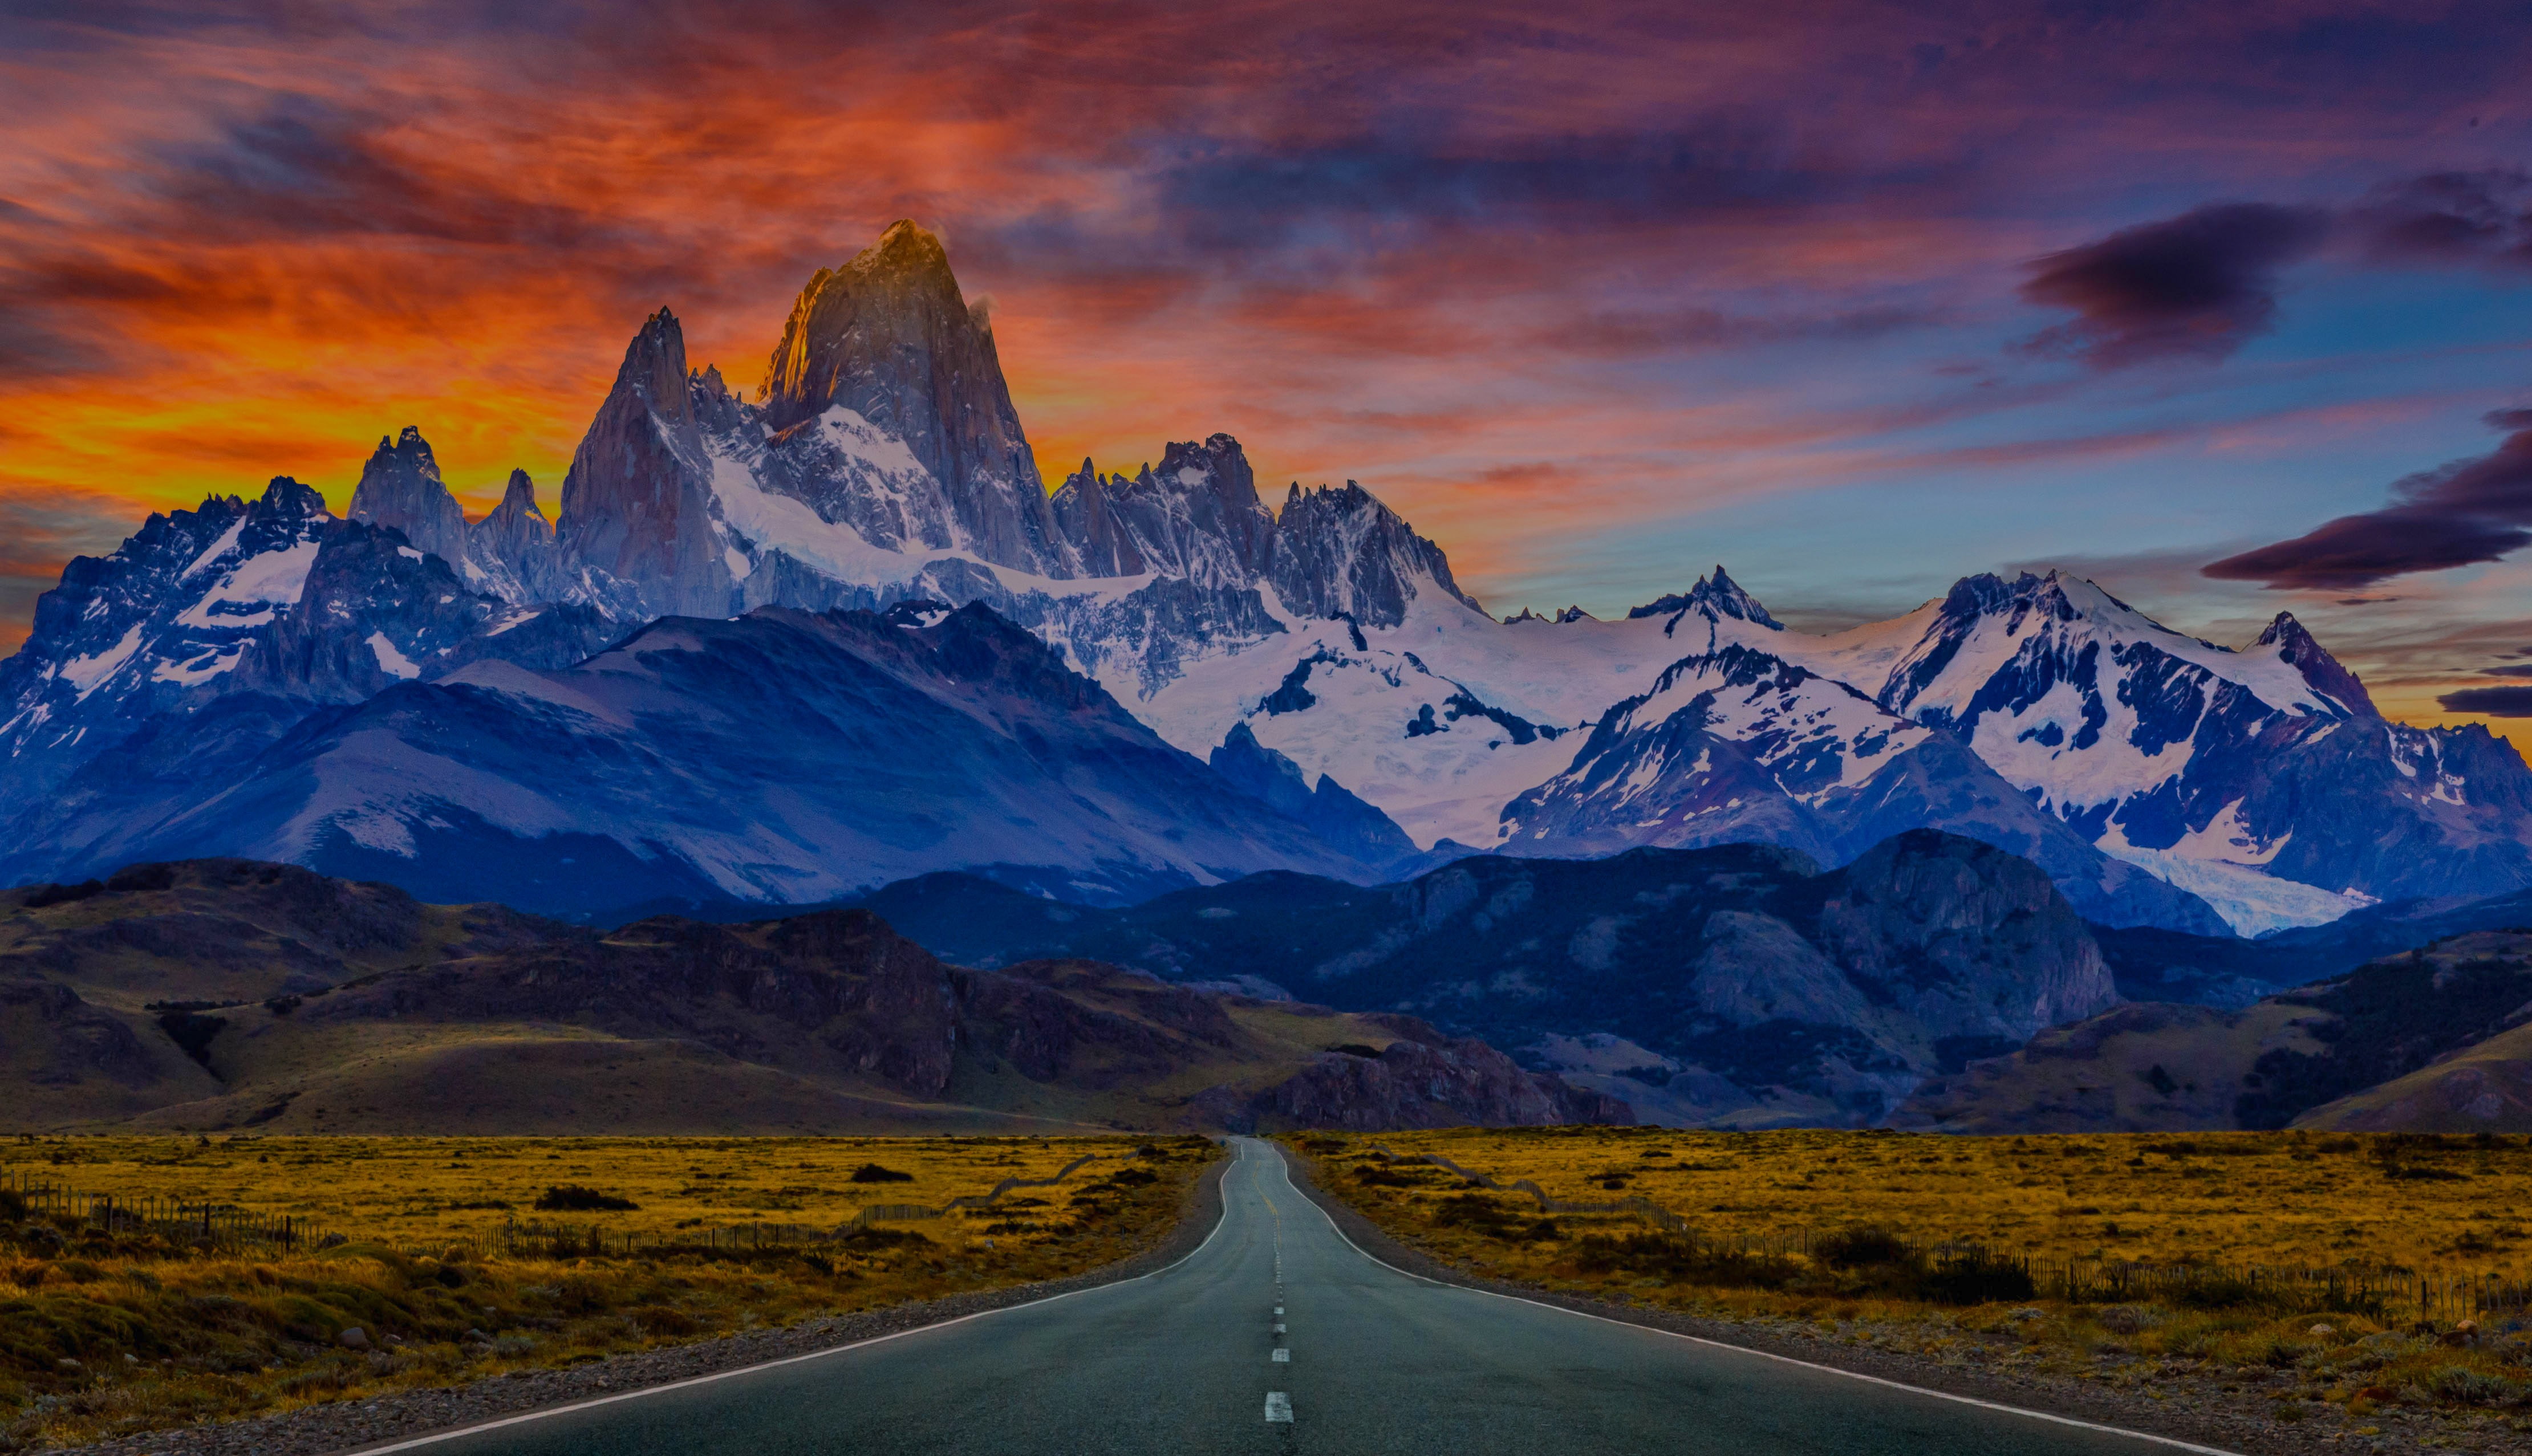 Torres del Paine, mountain, beauty in nature, scenics - nature